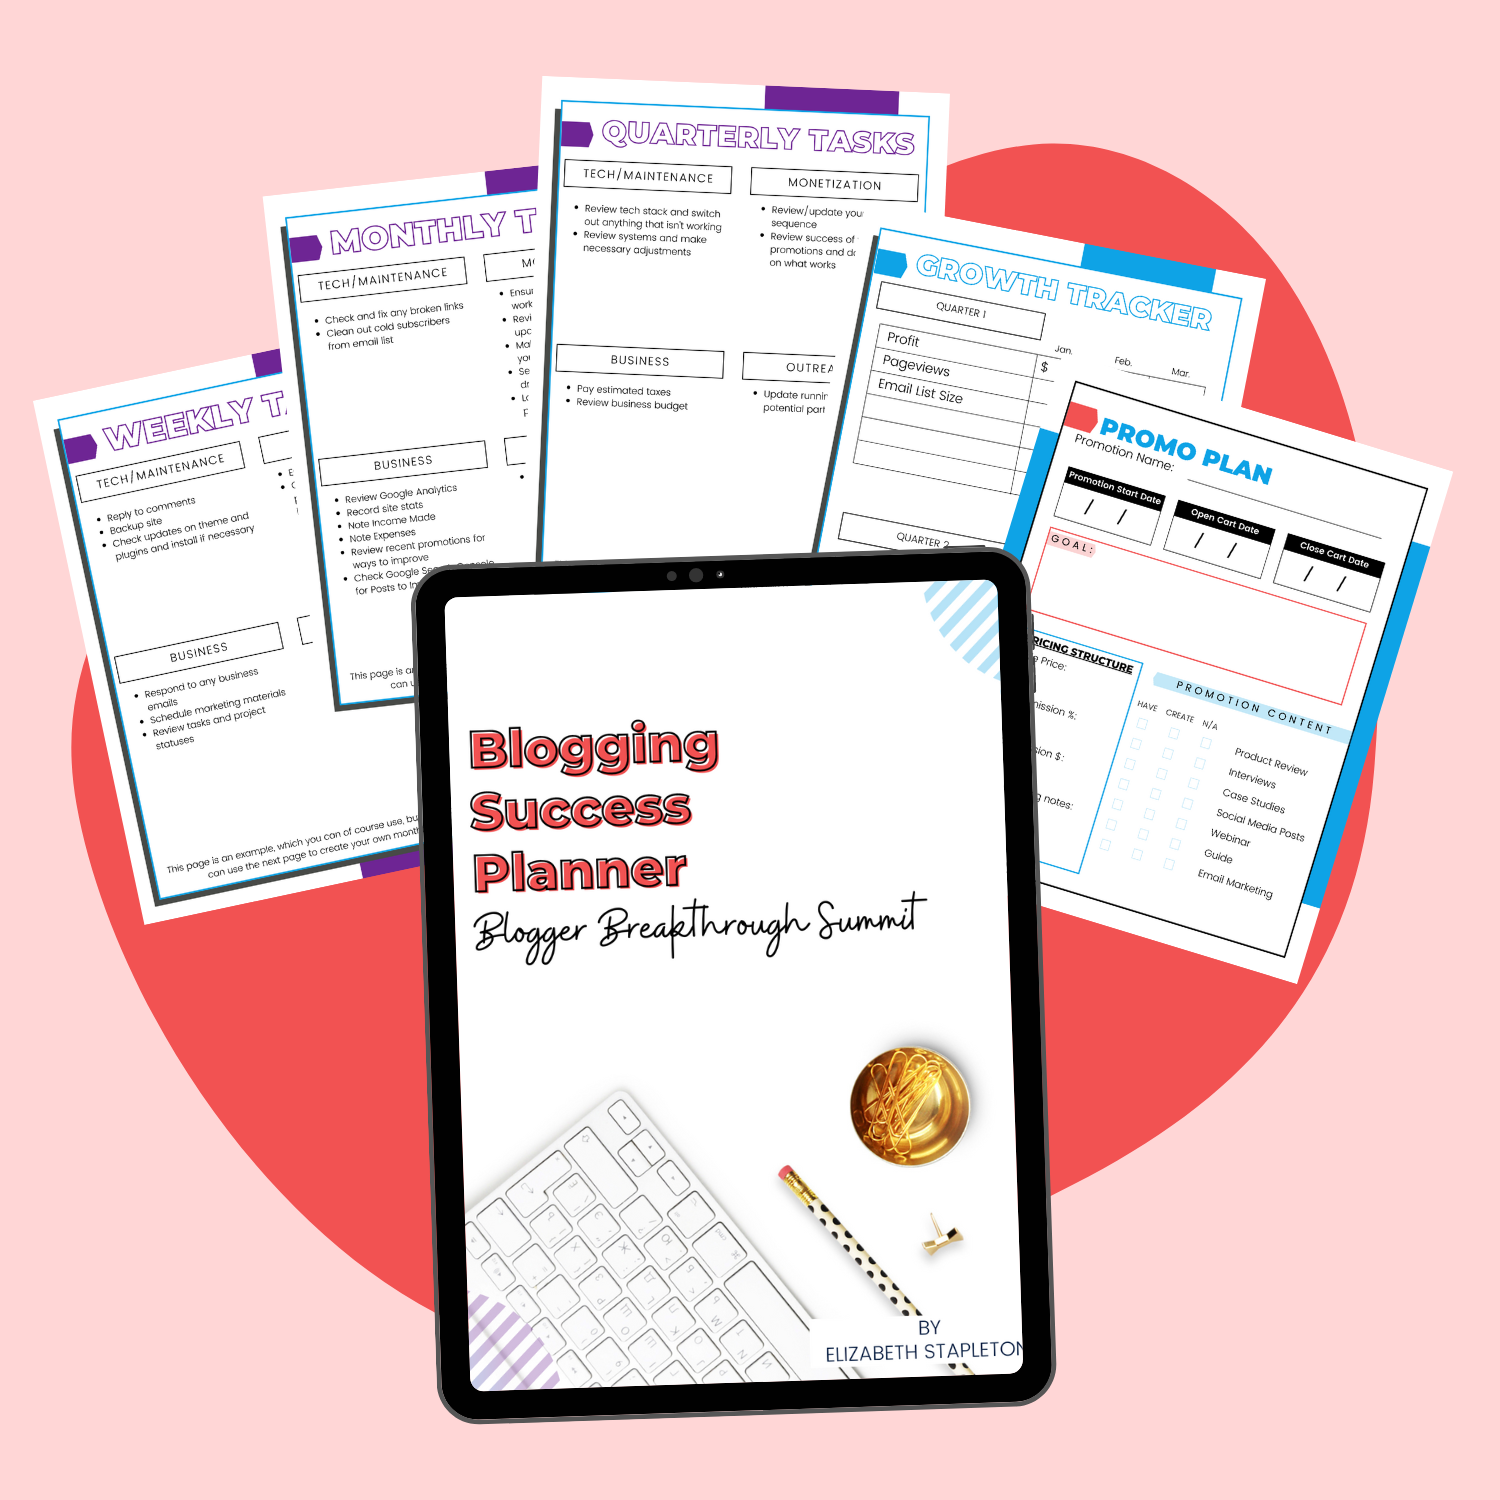 The Premium Blogging Success Planner by Blogger Breakthrough Summit is shown on an iPad.